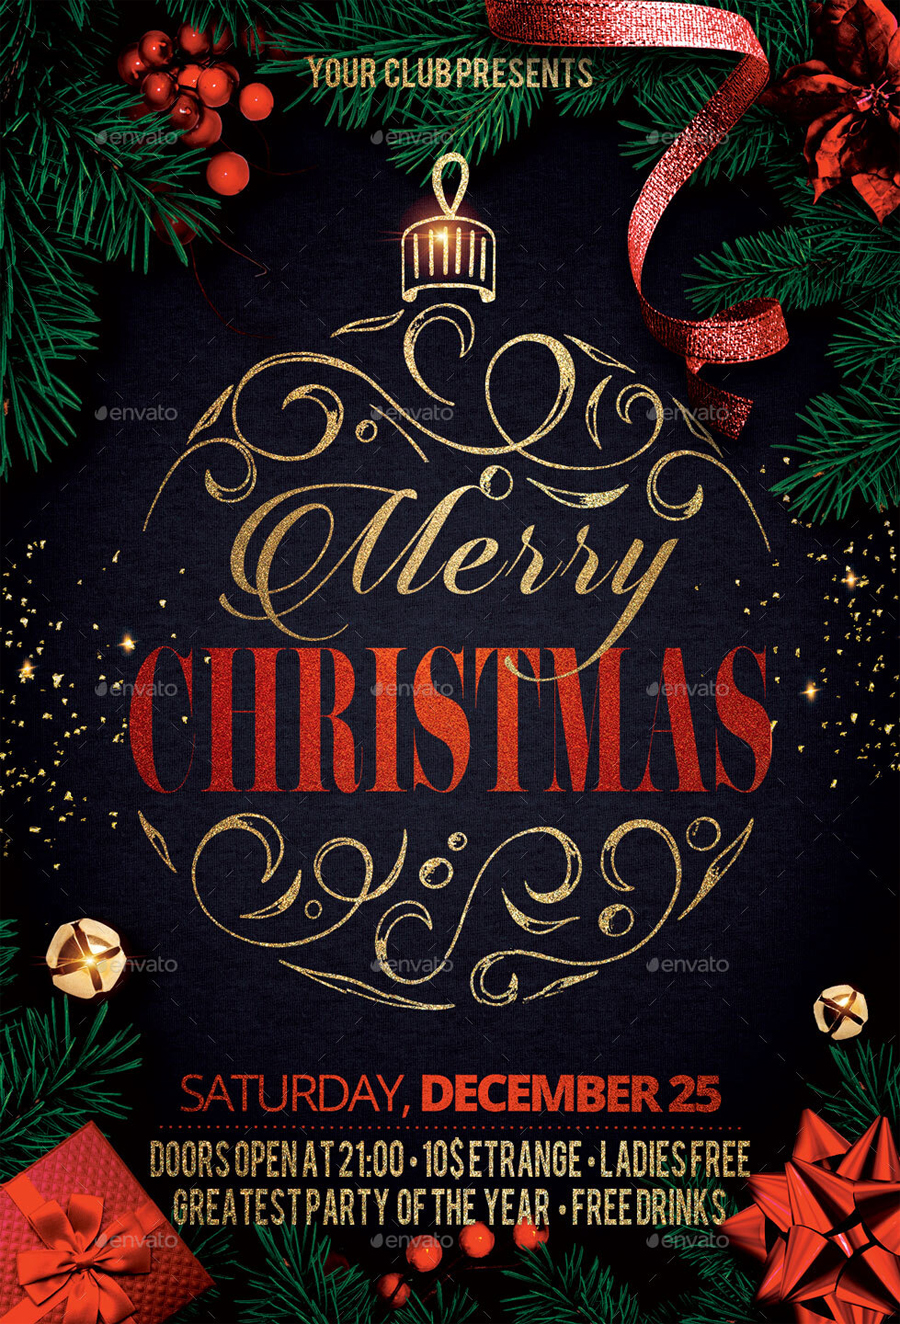 Christmas club party flyer template